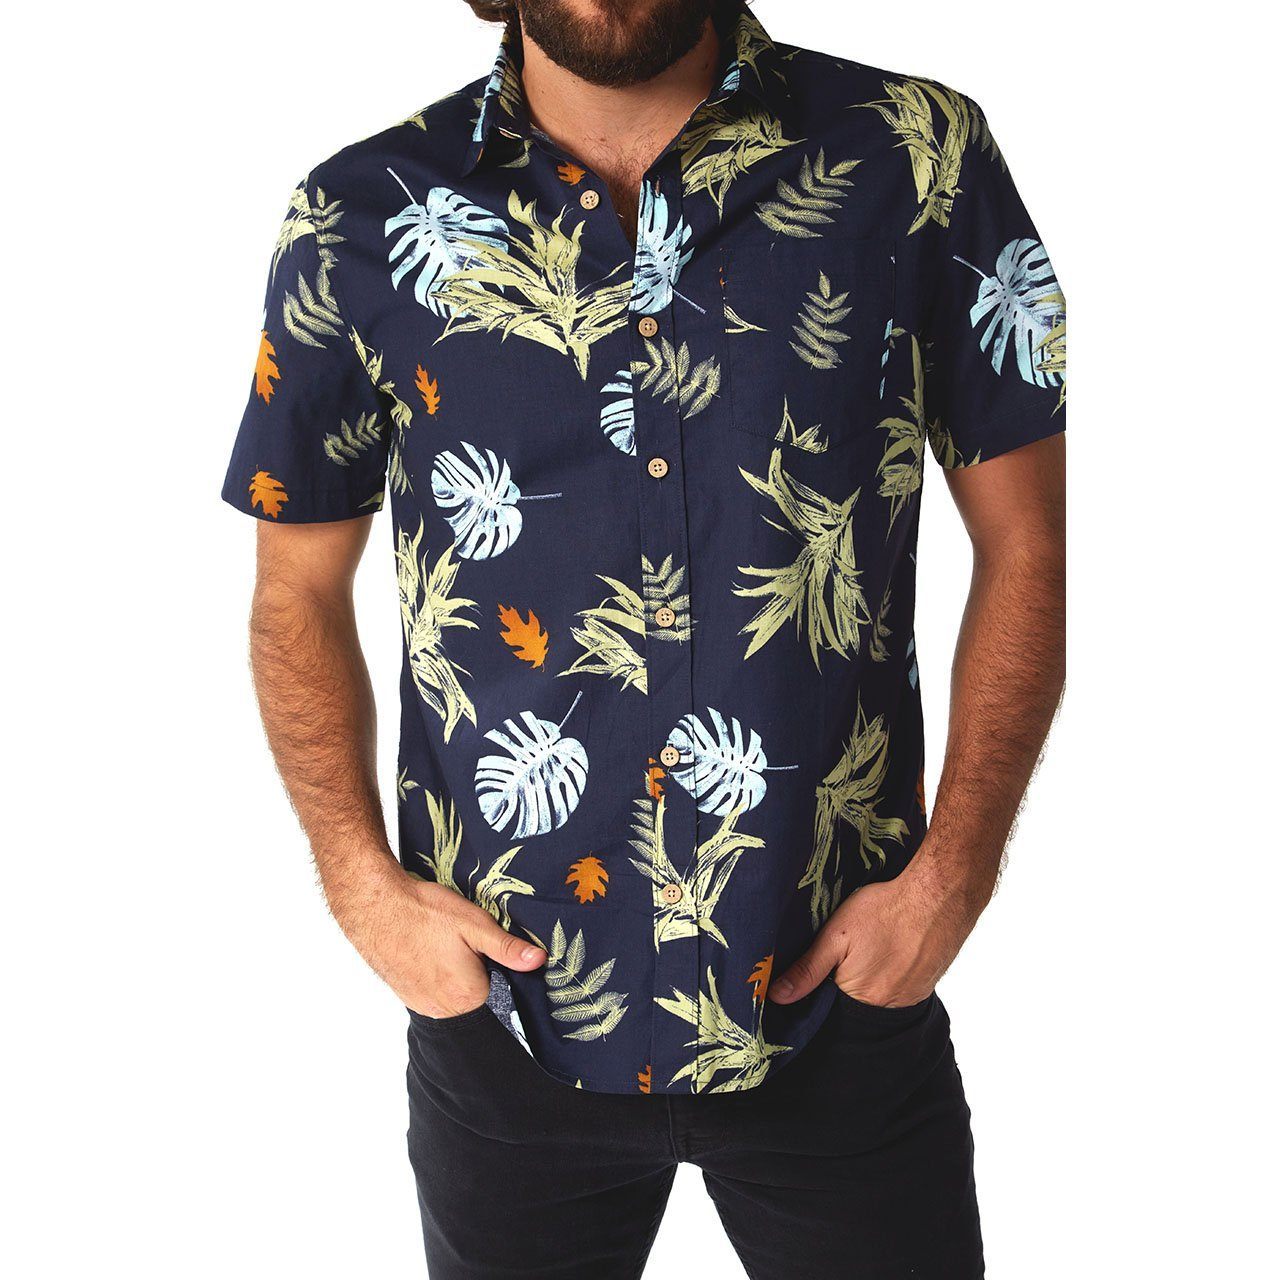 Picture of a Men's Button Up Navy Floral Short Sleeve Shirt front